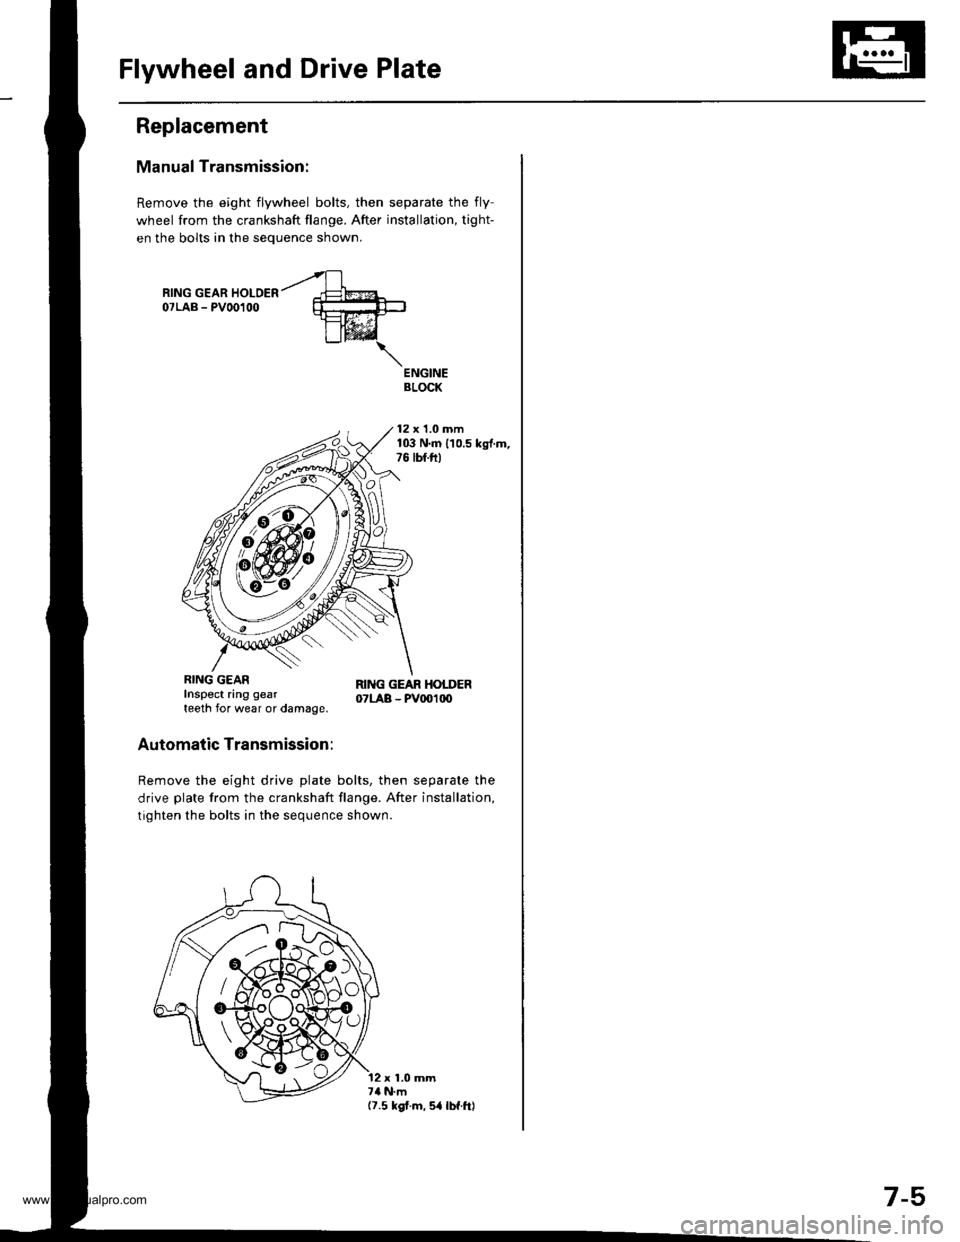 HONDA CR-V 1997 RD1-RD3 / 1.G User Guide 
Flywheel and Drive Plate
Replacement
Manual Transmission:
Remove the eight flywheel bolts, then separate the fly-
wheel from the crankshaft flange. After installation, tight-
en the bolts in the sequ